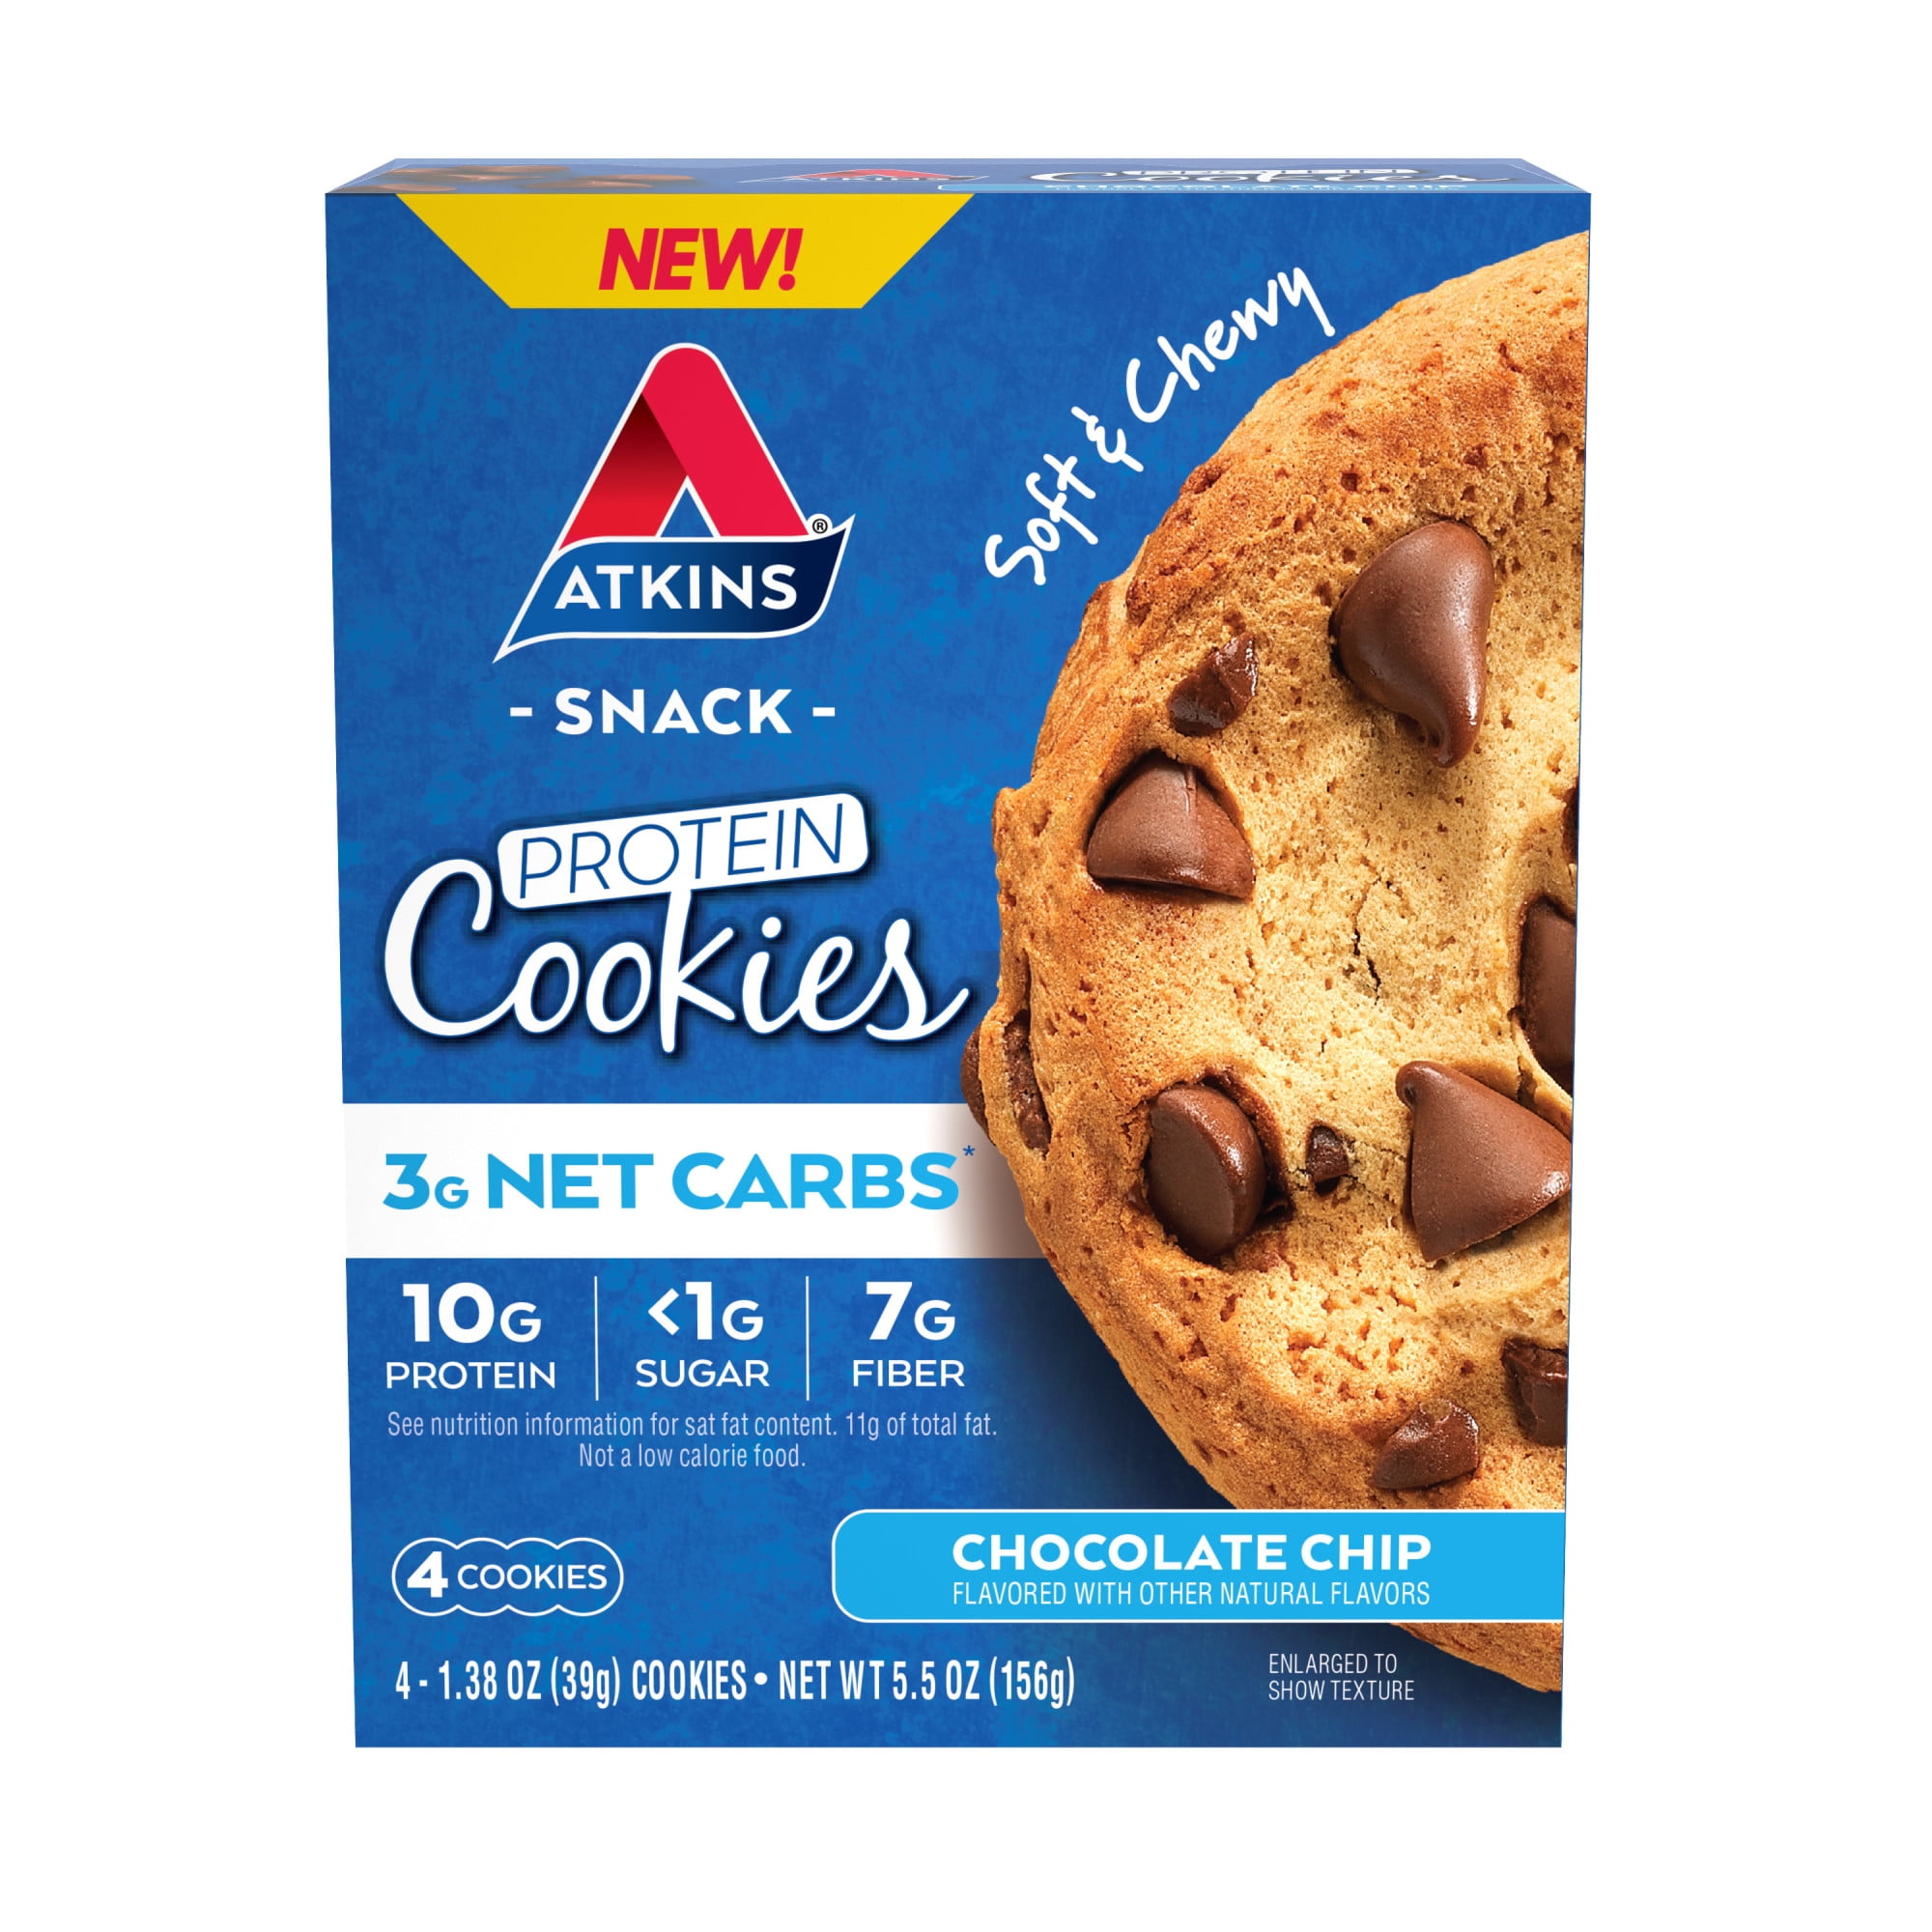 Atkins Soft and Chewy Chocolate Chip Protein Cookie, Keto Friendly, High Protein, Low Carb, 4 Count